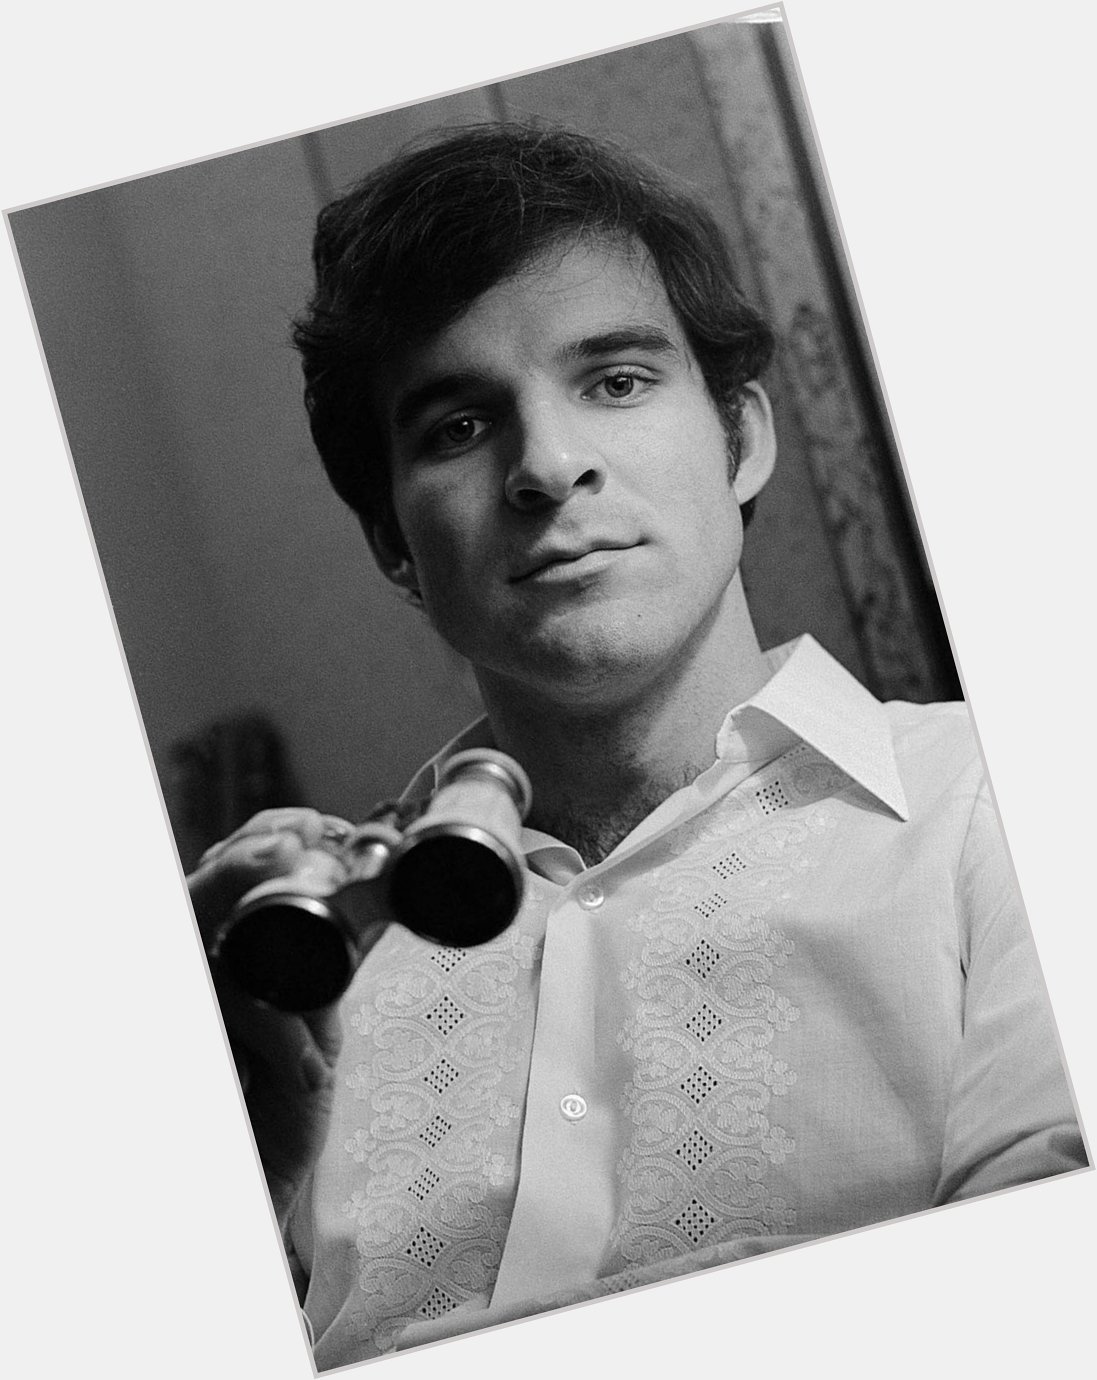 Happy birthday to American actor, comedian, author, filmmaker, and musician Steve Martin, born August 14, 1945. 